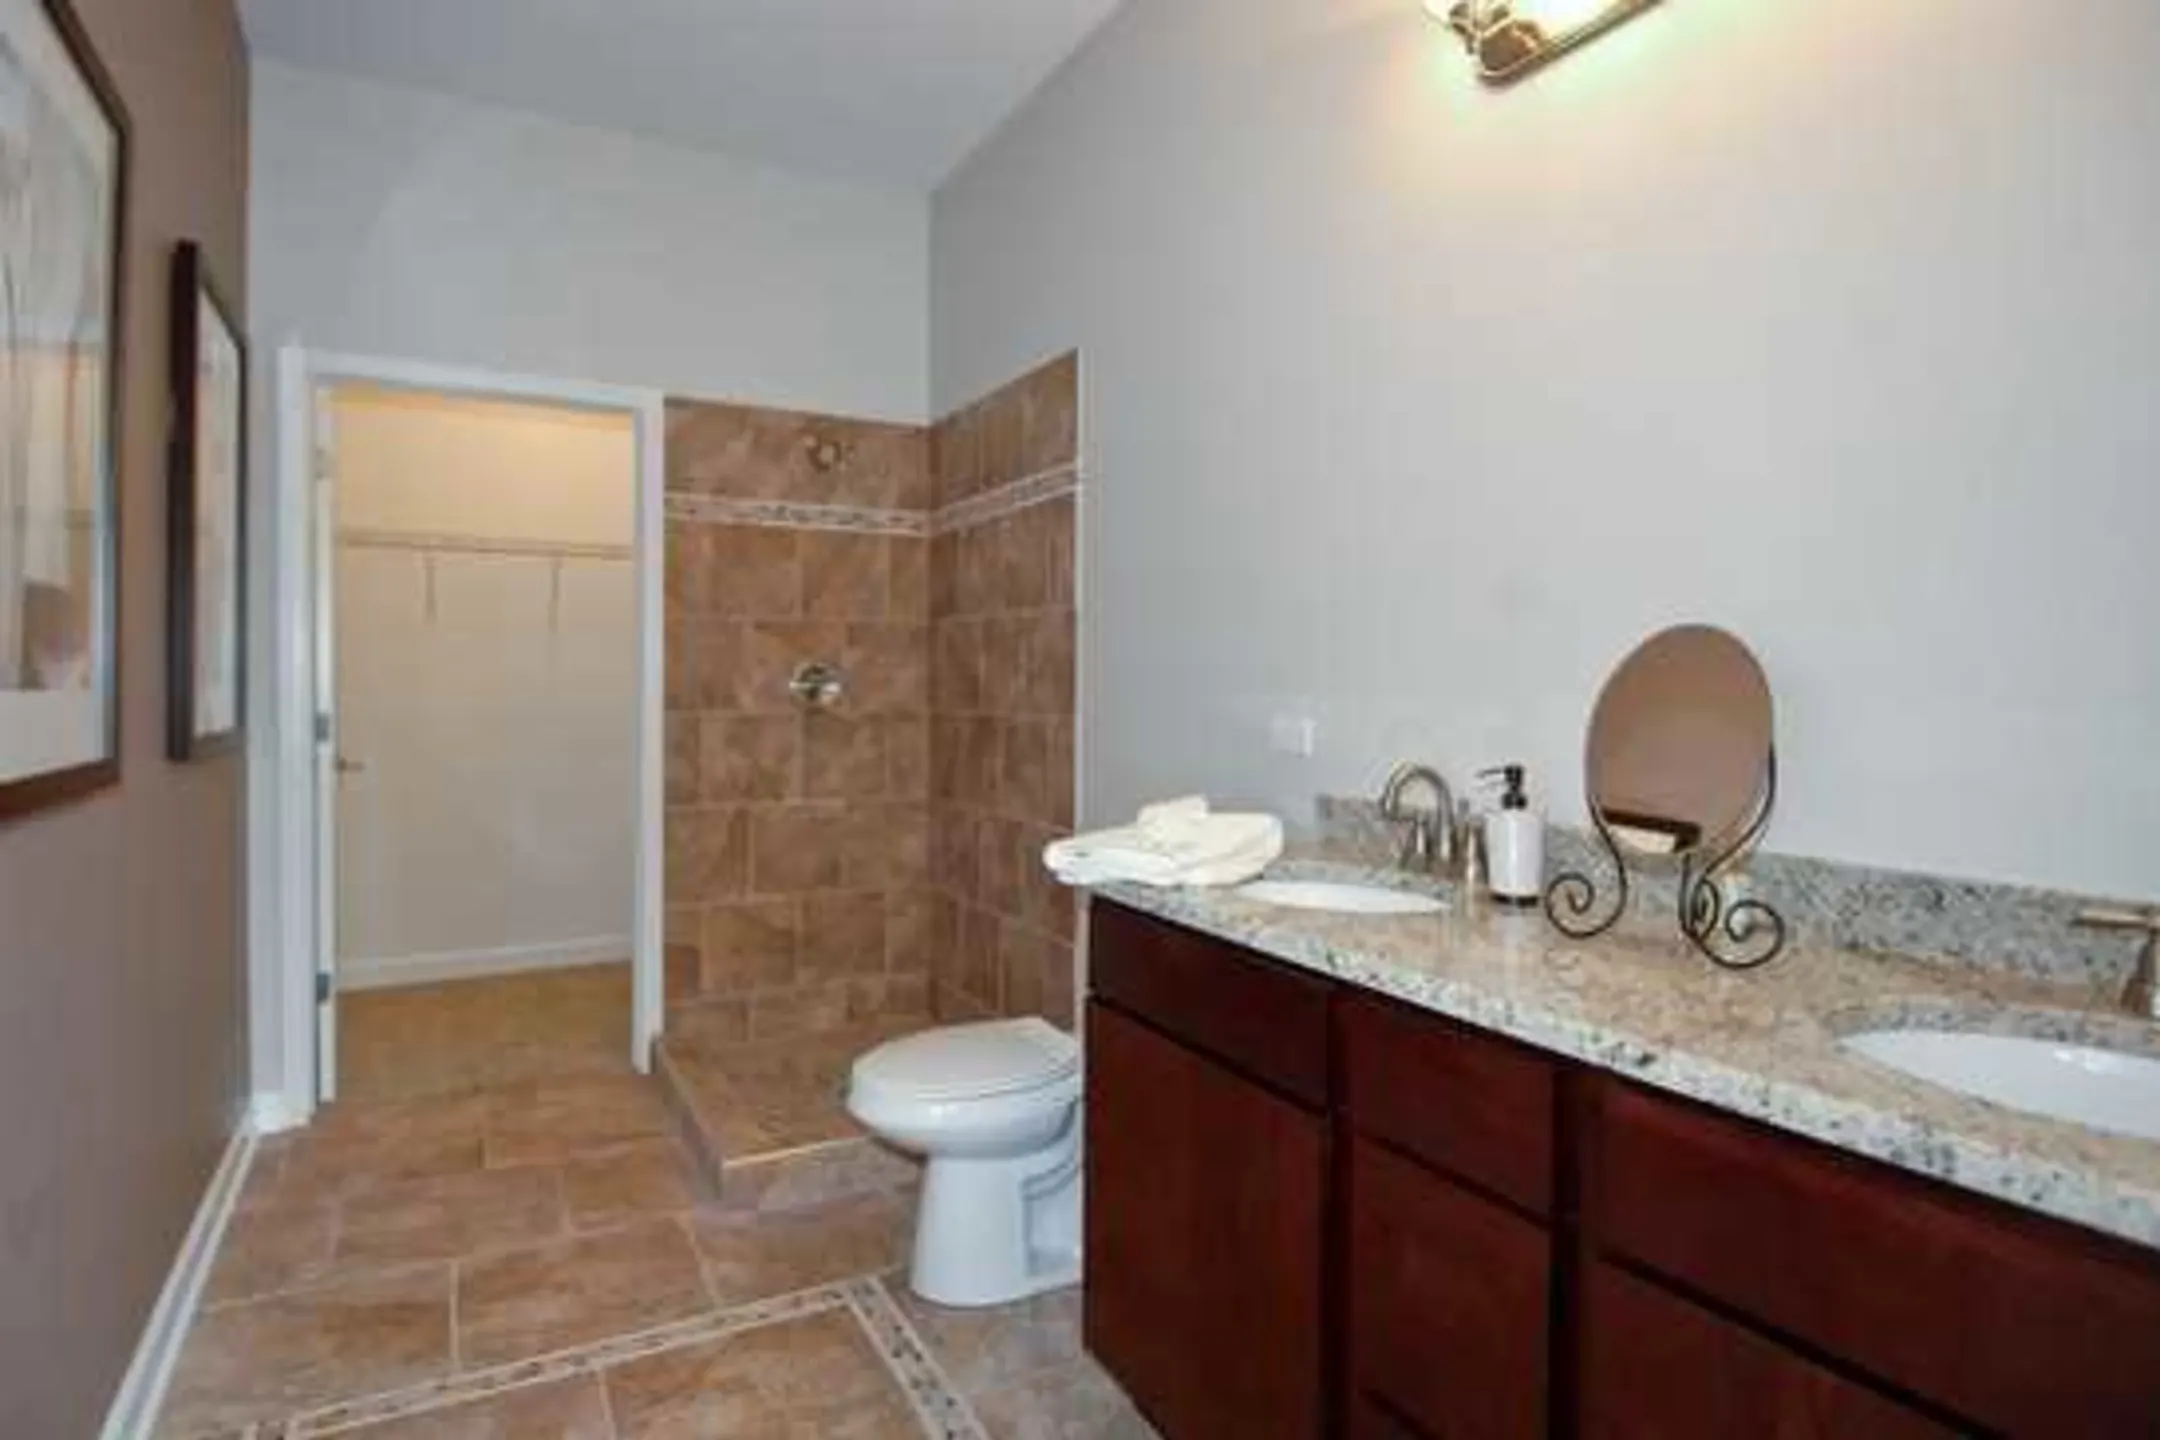 Bathroom - River Place Luxury Residences - McHenry, IL